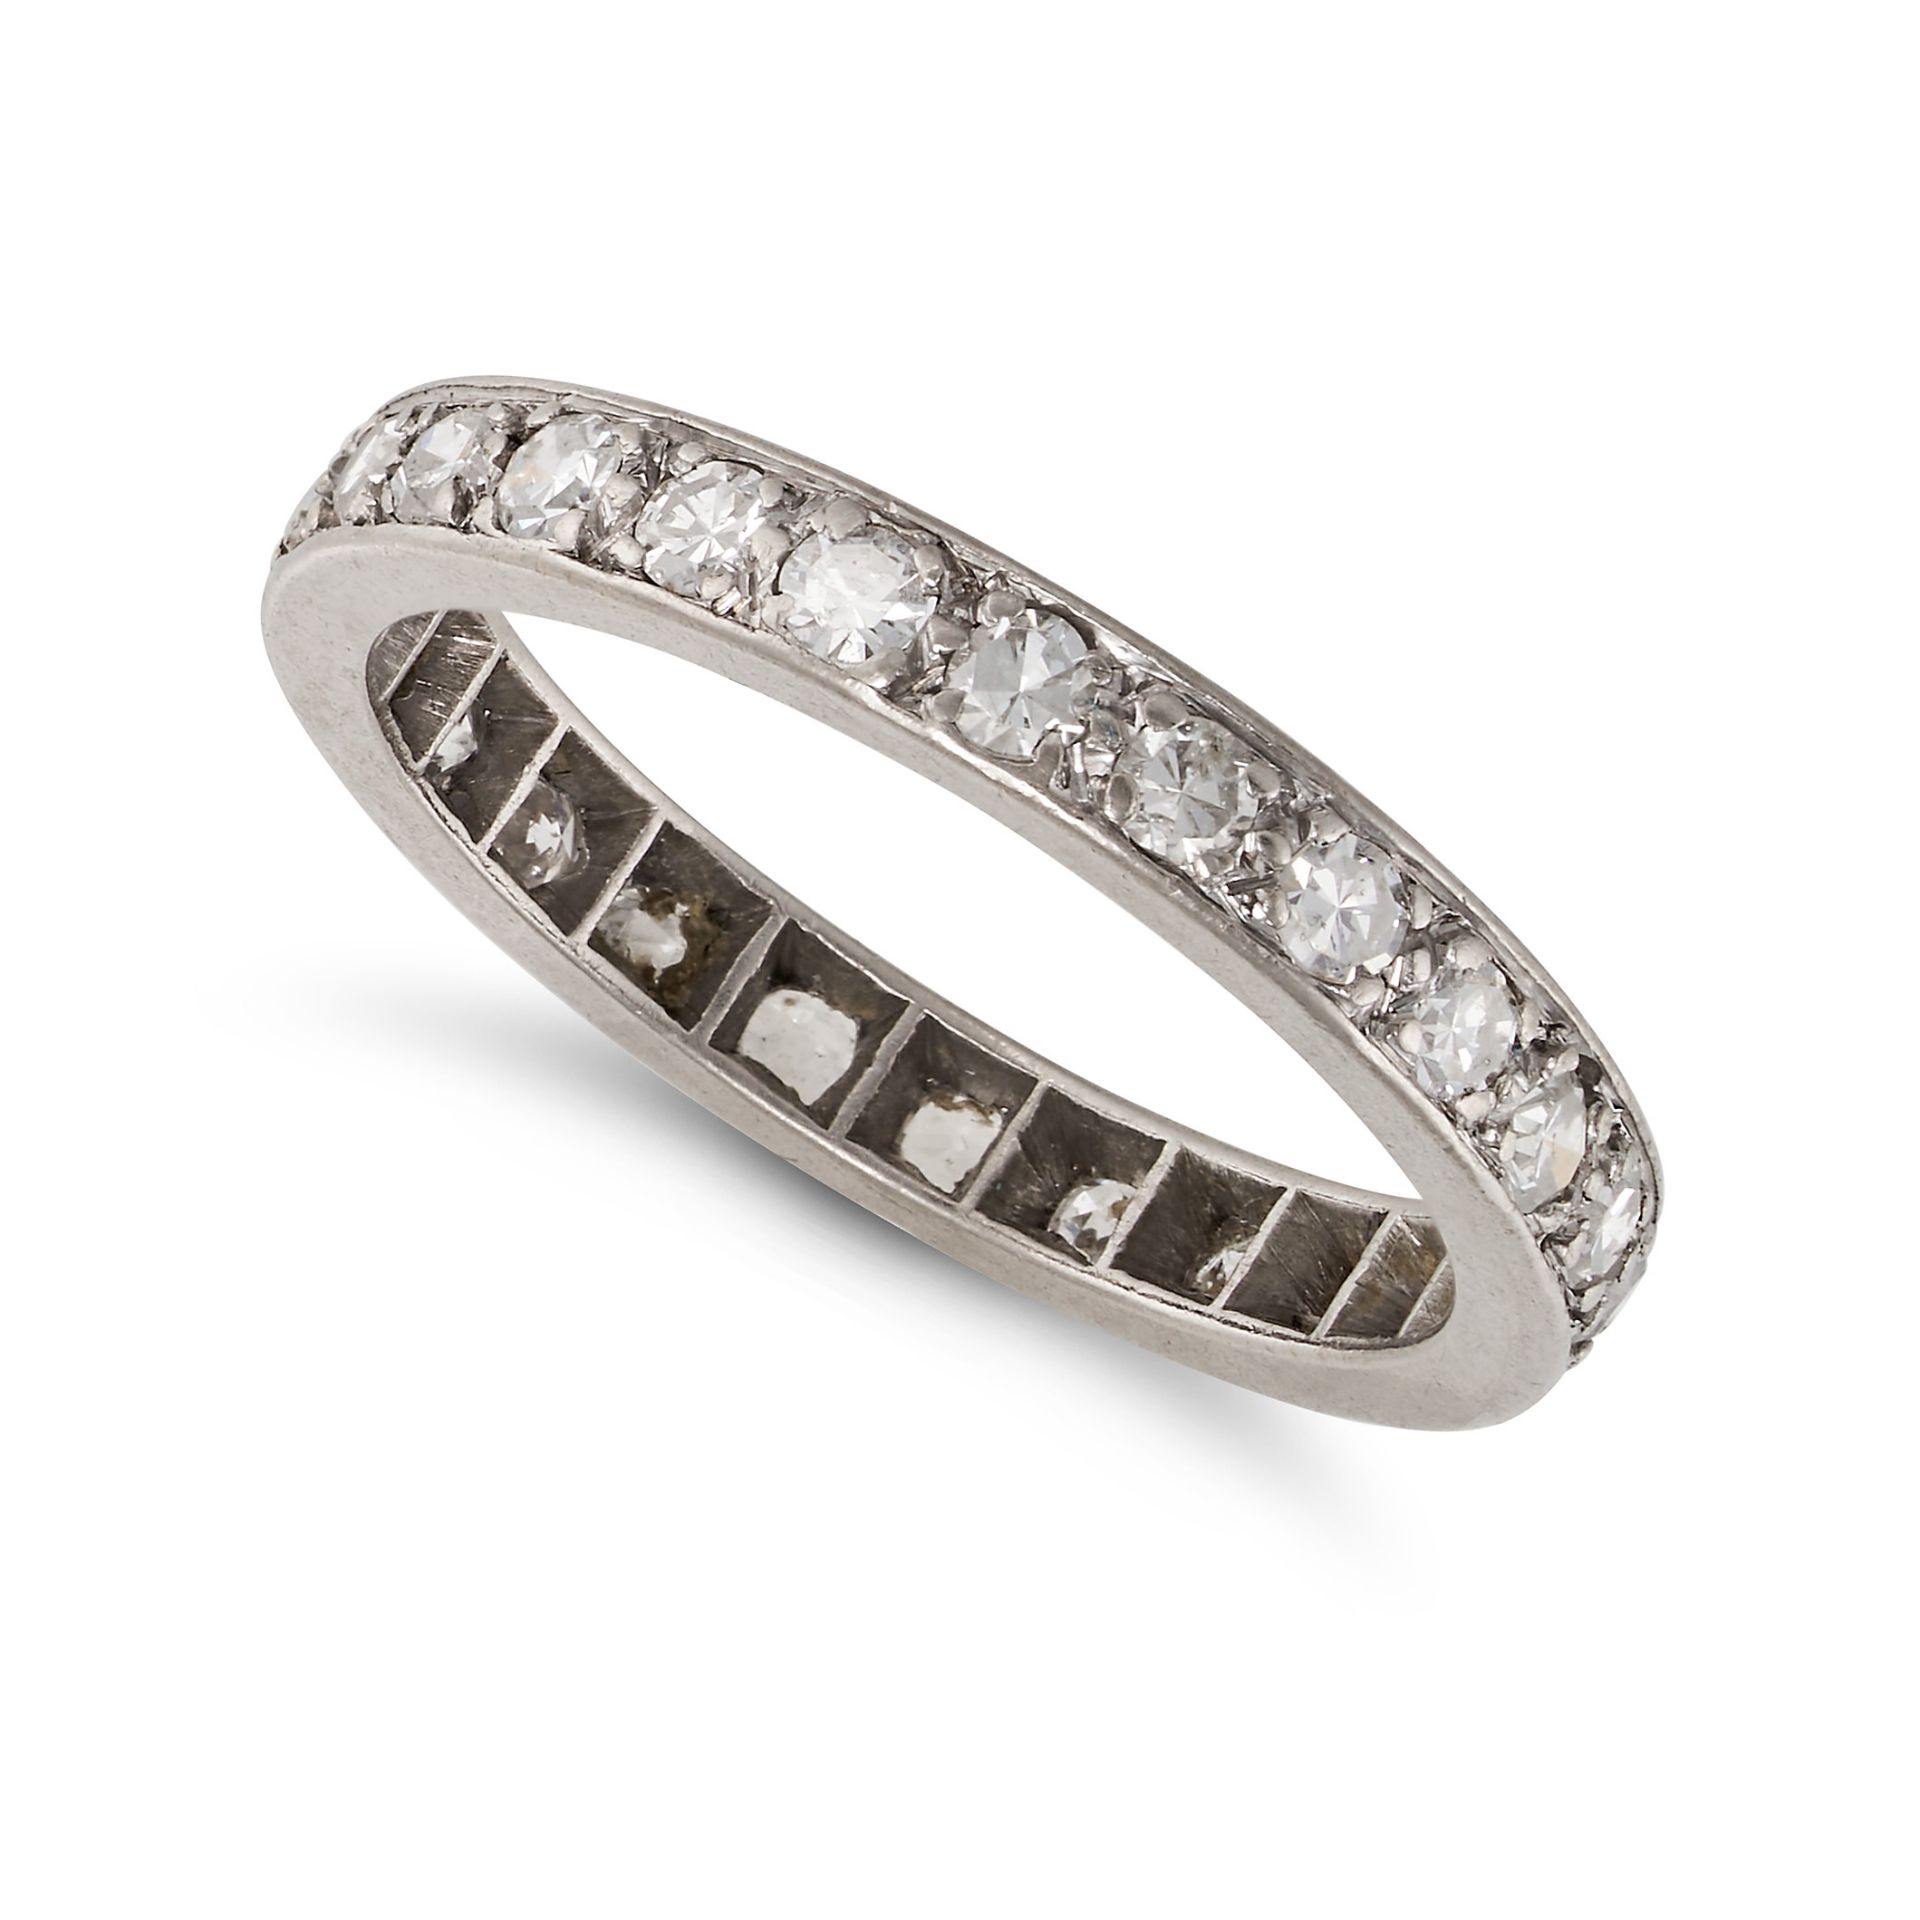 A DIAMOND ETERNITY RING in platinum, set throughout with round brilliant cut diamonds, no assay m...